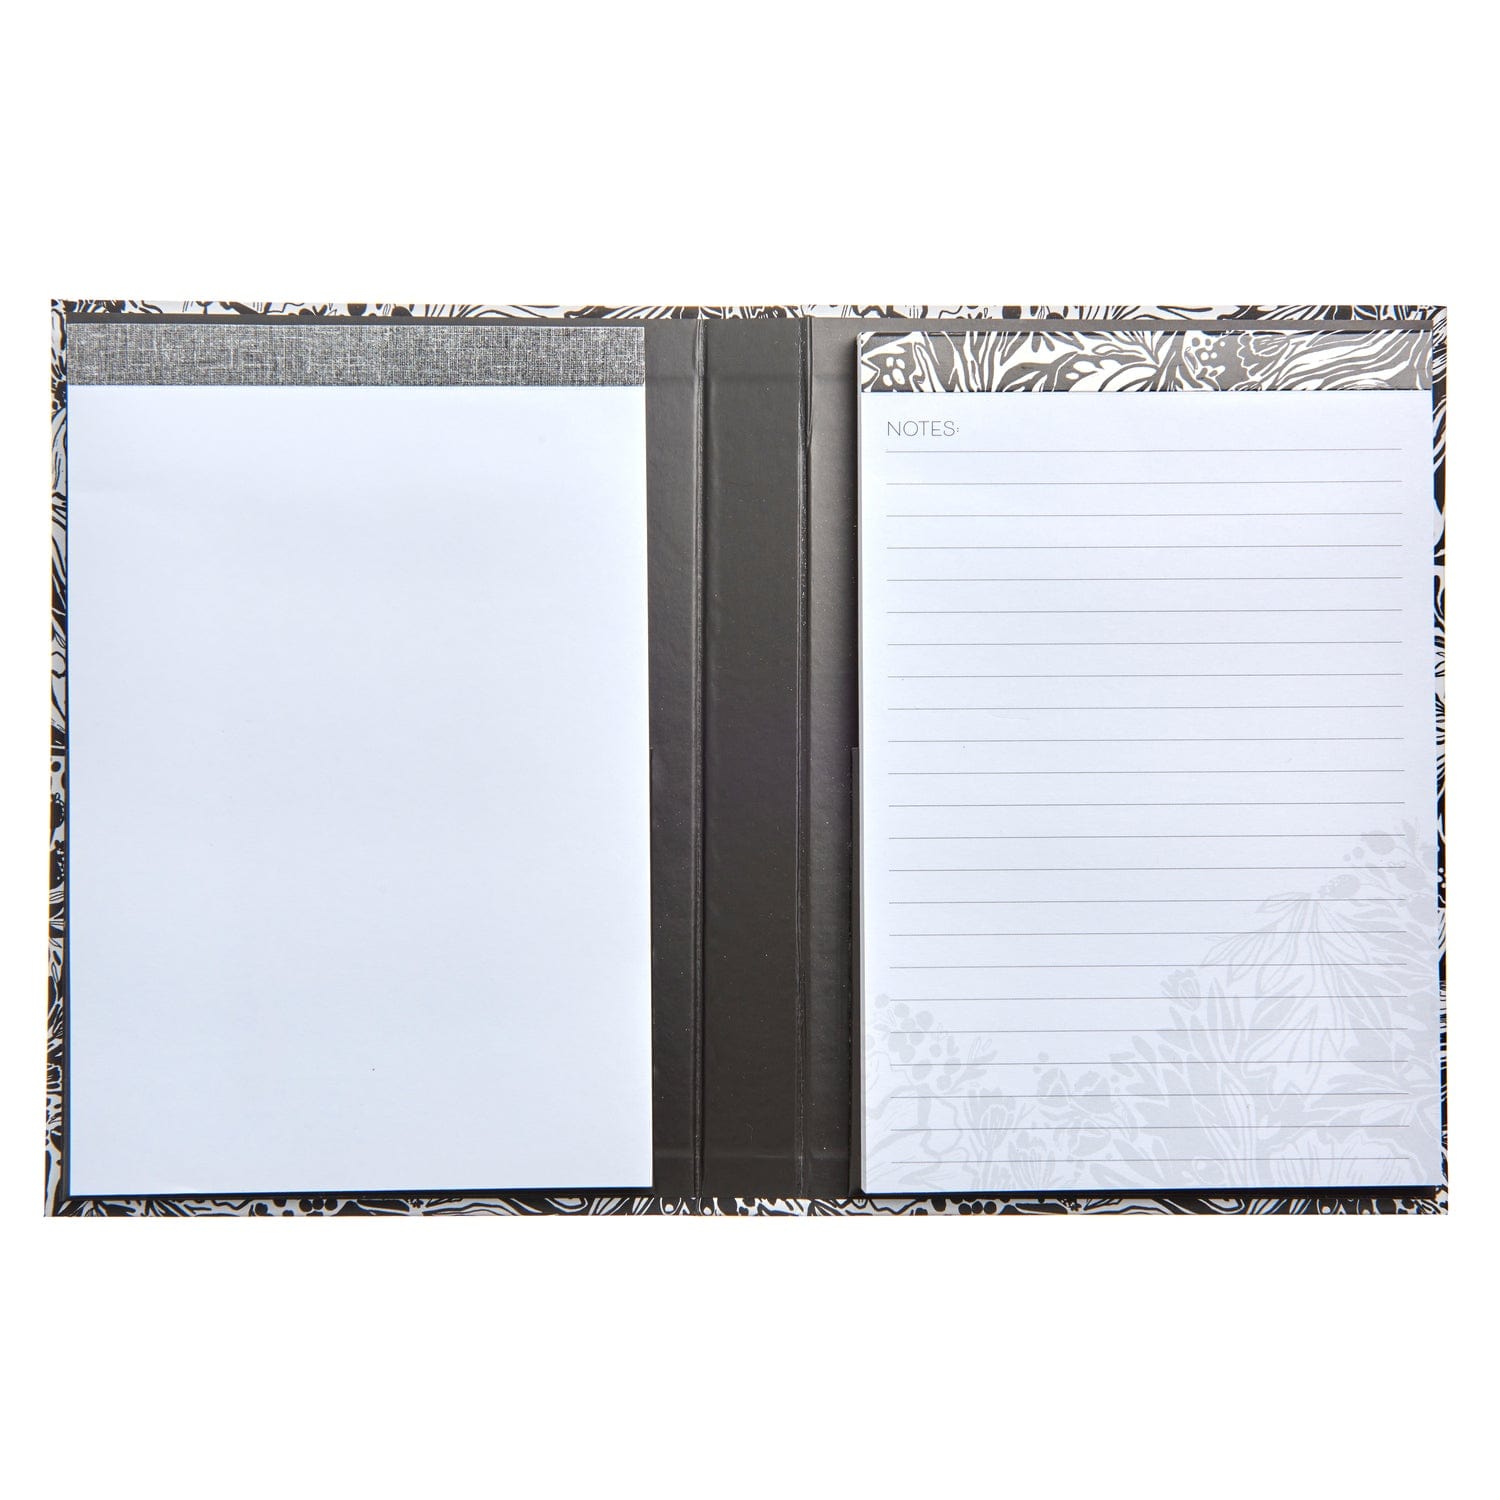 Black + White Floral Padfolio - 2 Notepads